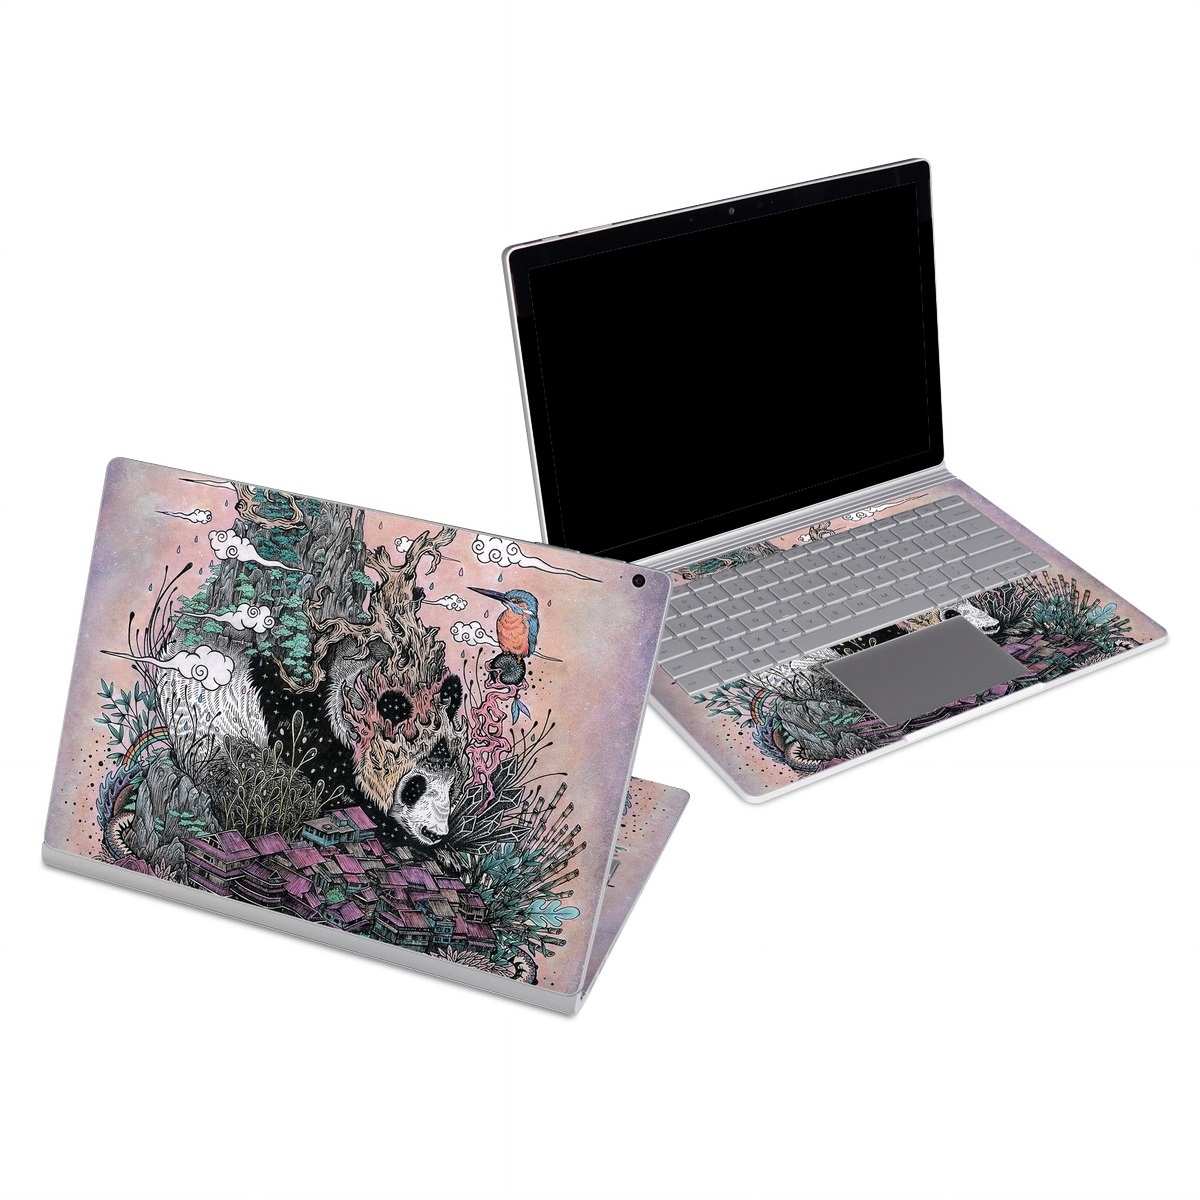 Microsoft Surface Book Series Skin design of Illustration, Art, Fictional character, Printmaking, Marsupial, Graphic design, Rodent, Possum, with gray, black, red, blue, purple colors